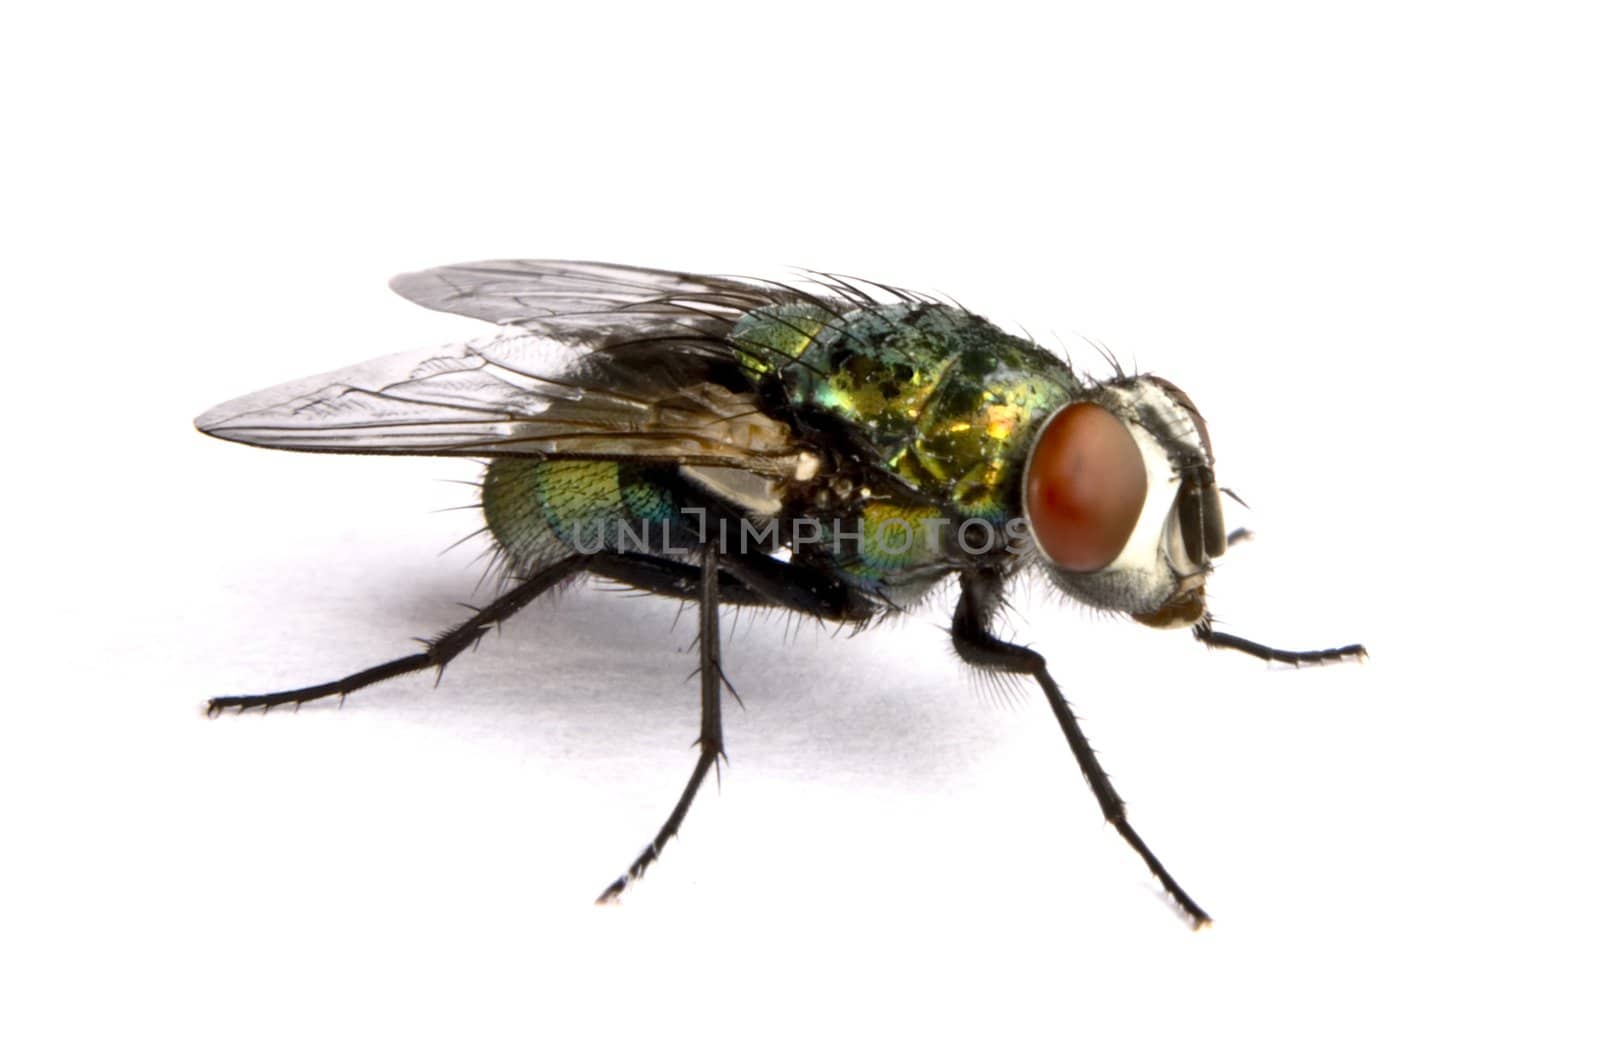 iridescent house fly in close up on light background